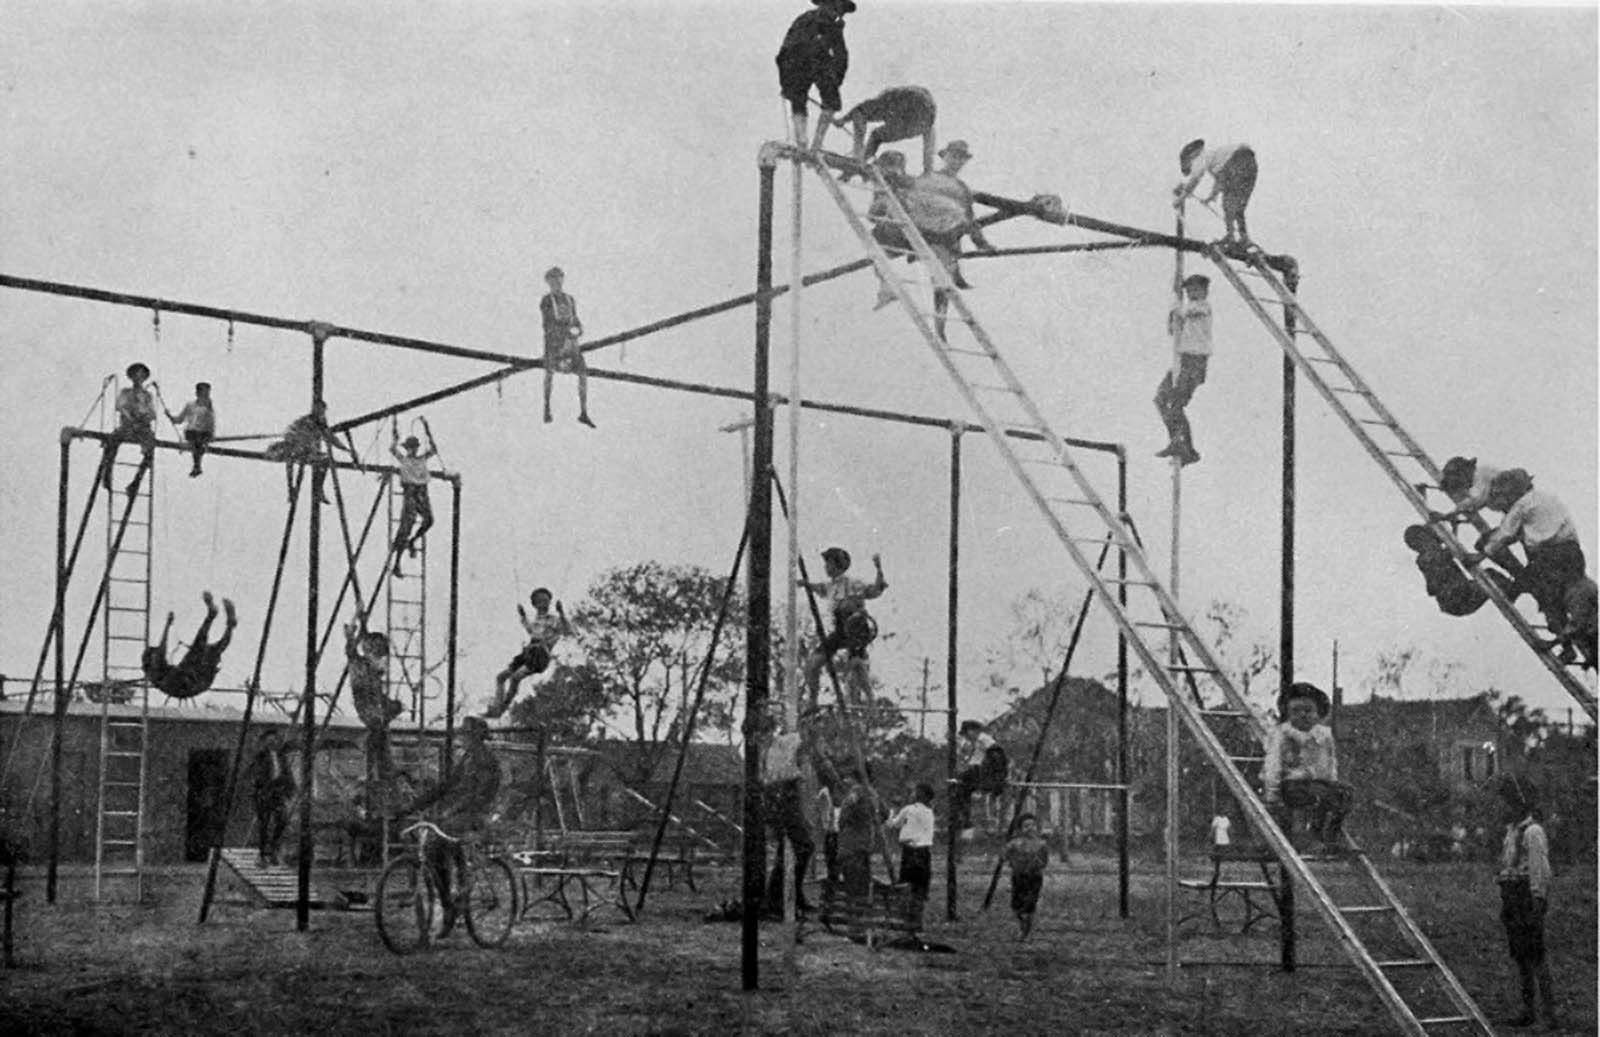 How We Came to Play: Pictures of Kids Enjoy Dangerous Playgrounds in the Early 20th Century ~ Vintage Everyday